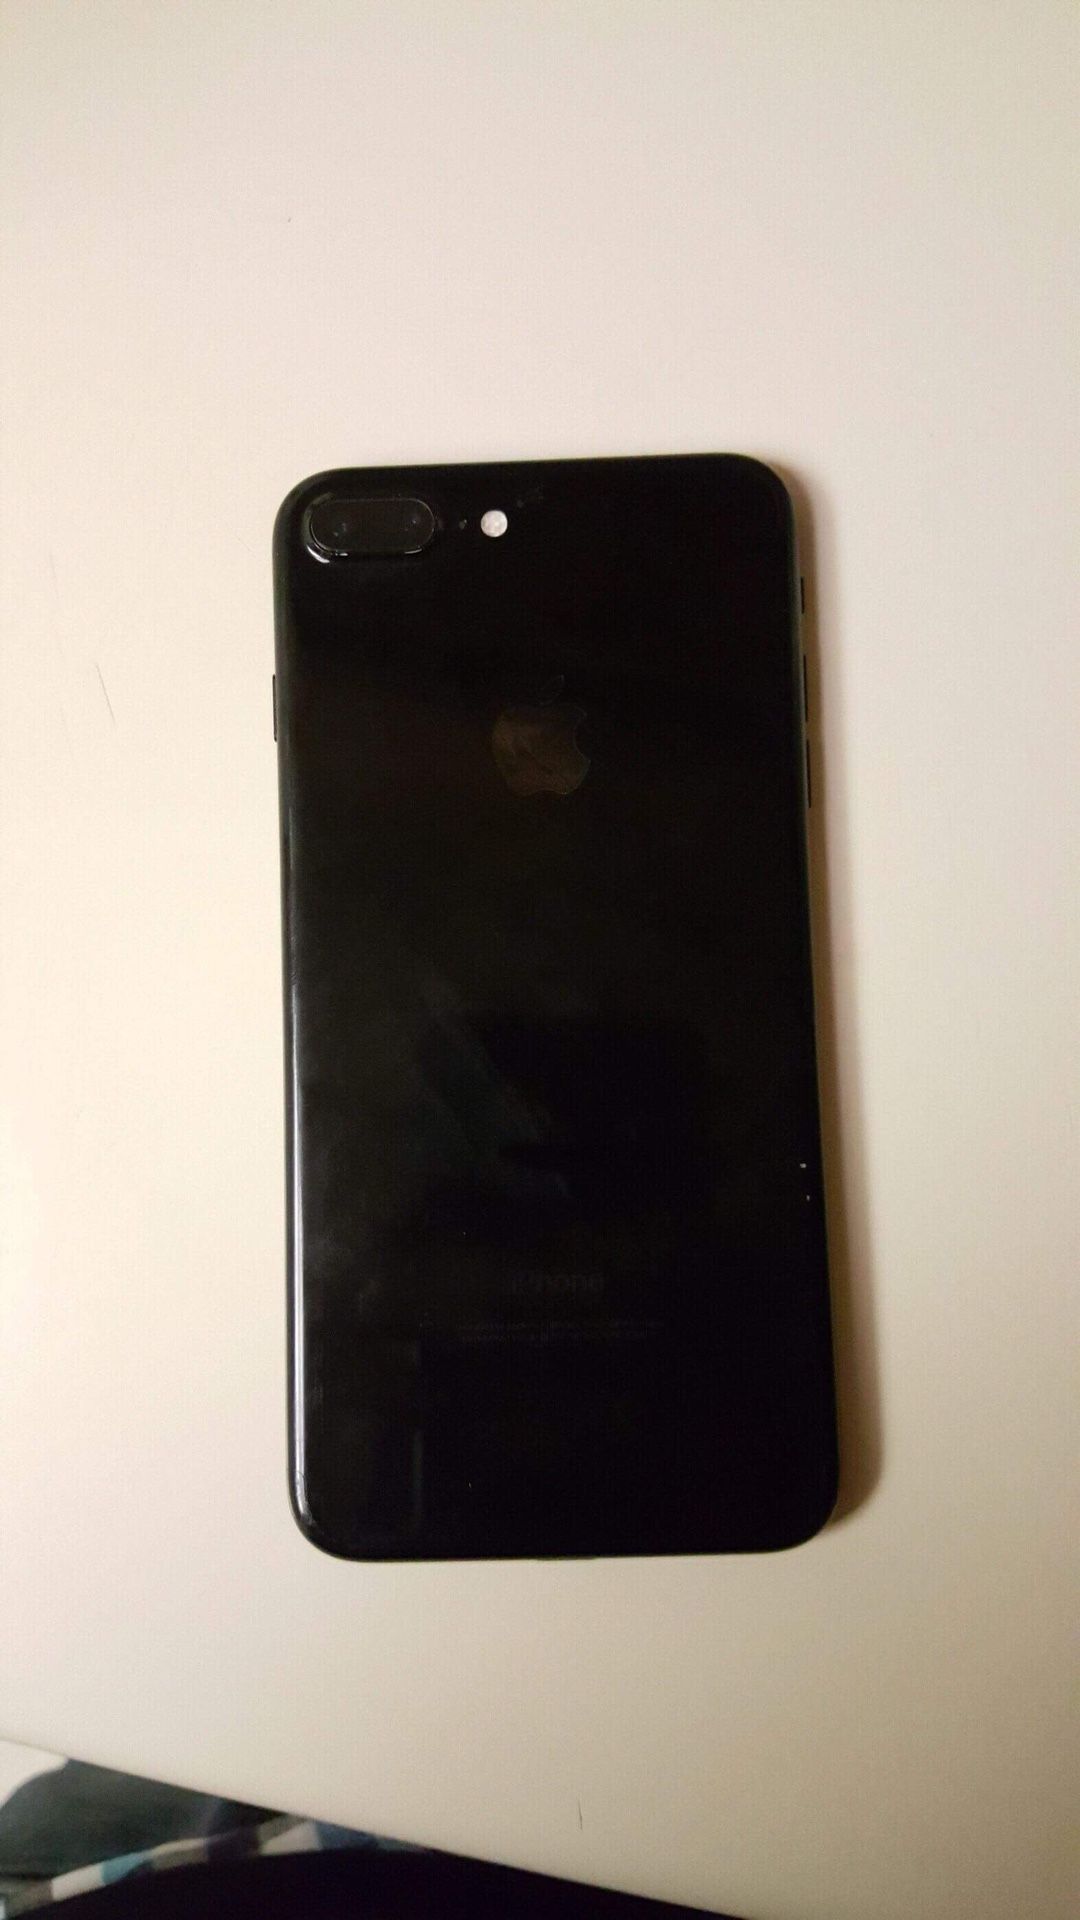 iPhone 7 Plus jet black like new up graded that’s why dm me offers no low ballers